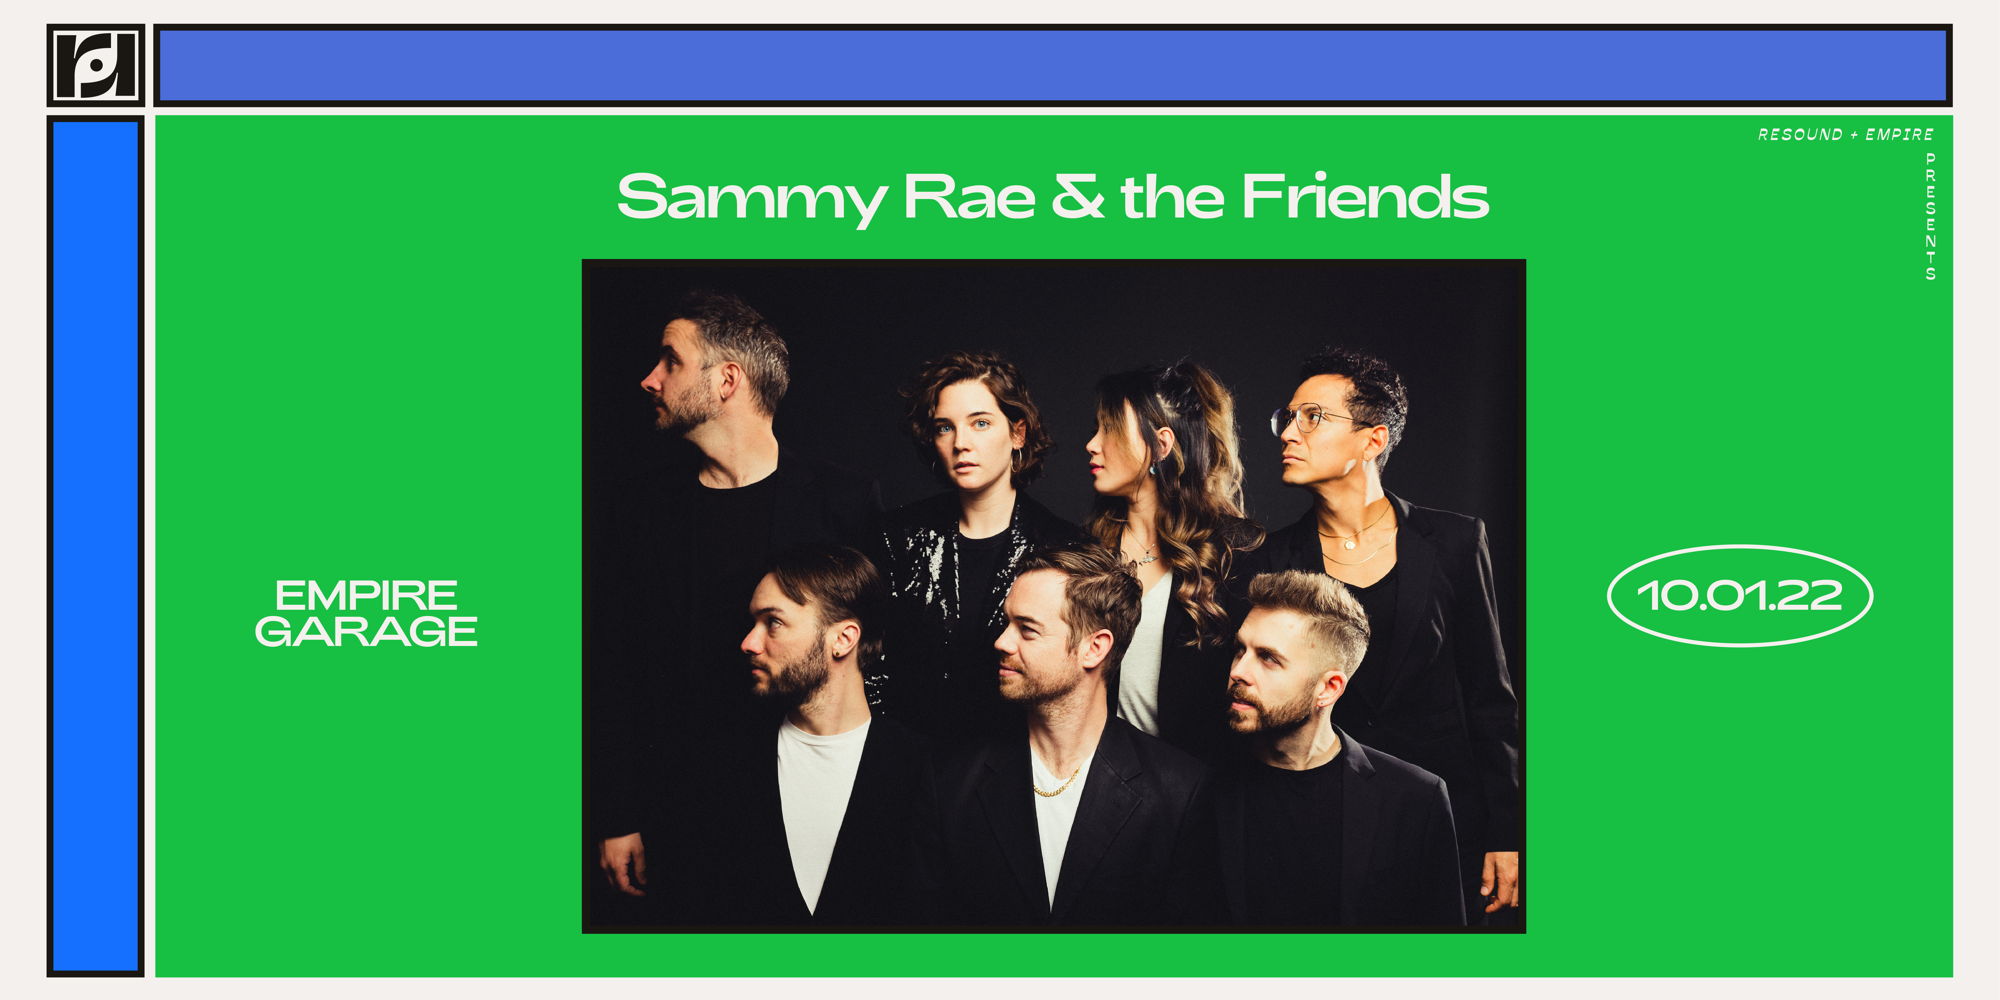 Empire & Resound Presents: Sammy Rae & the Friends at Empire Garage - 10/1 promotional image